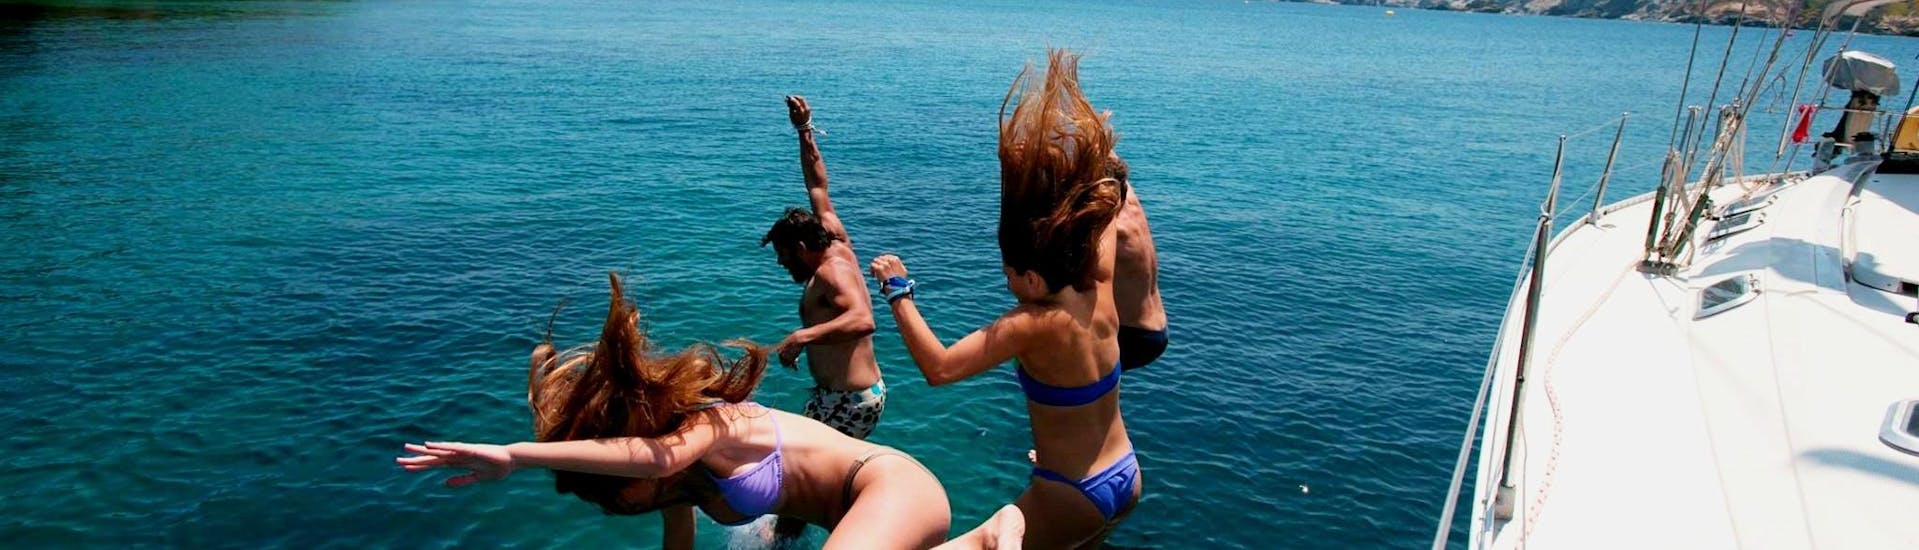 People jumping from Altersail's boat during a boat trip to Dia from Heraklion.